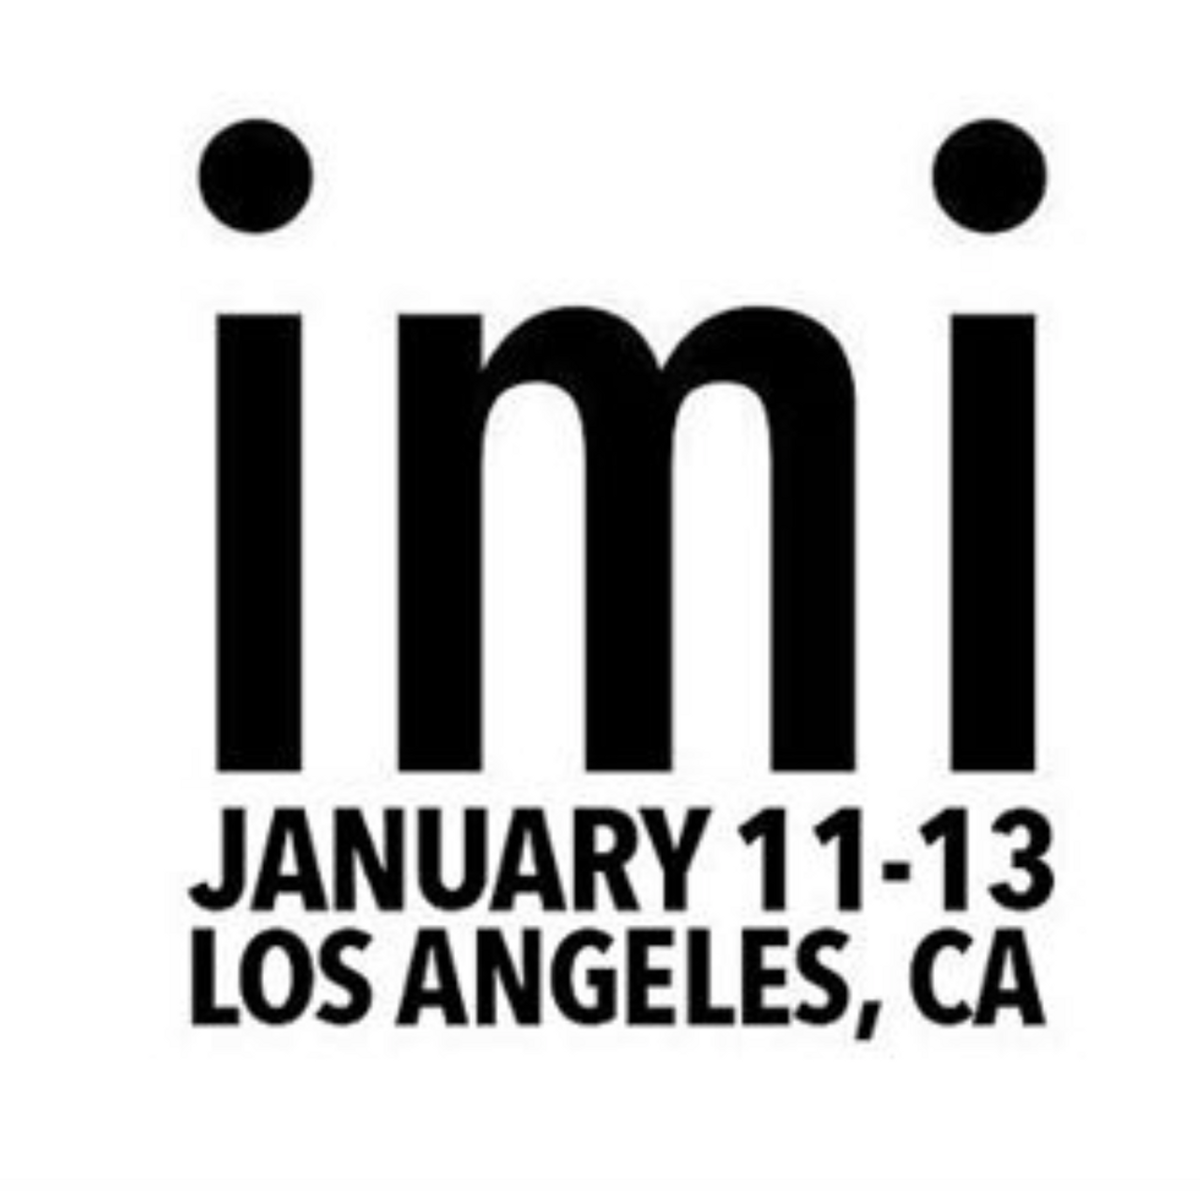 All About The Music Biz: Attending The Independent Music Industry Conference